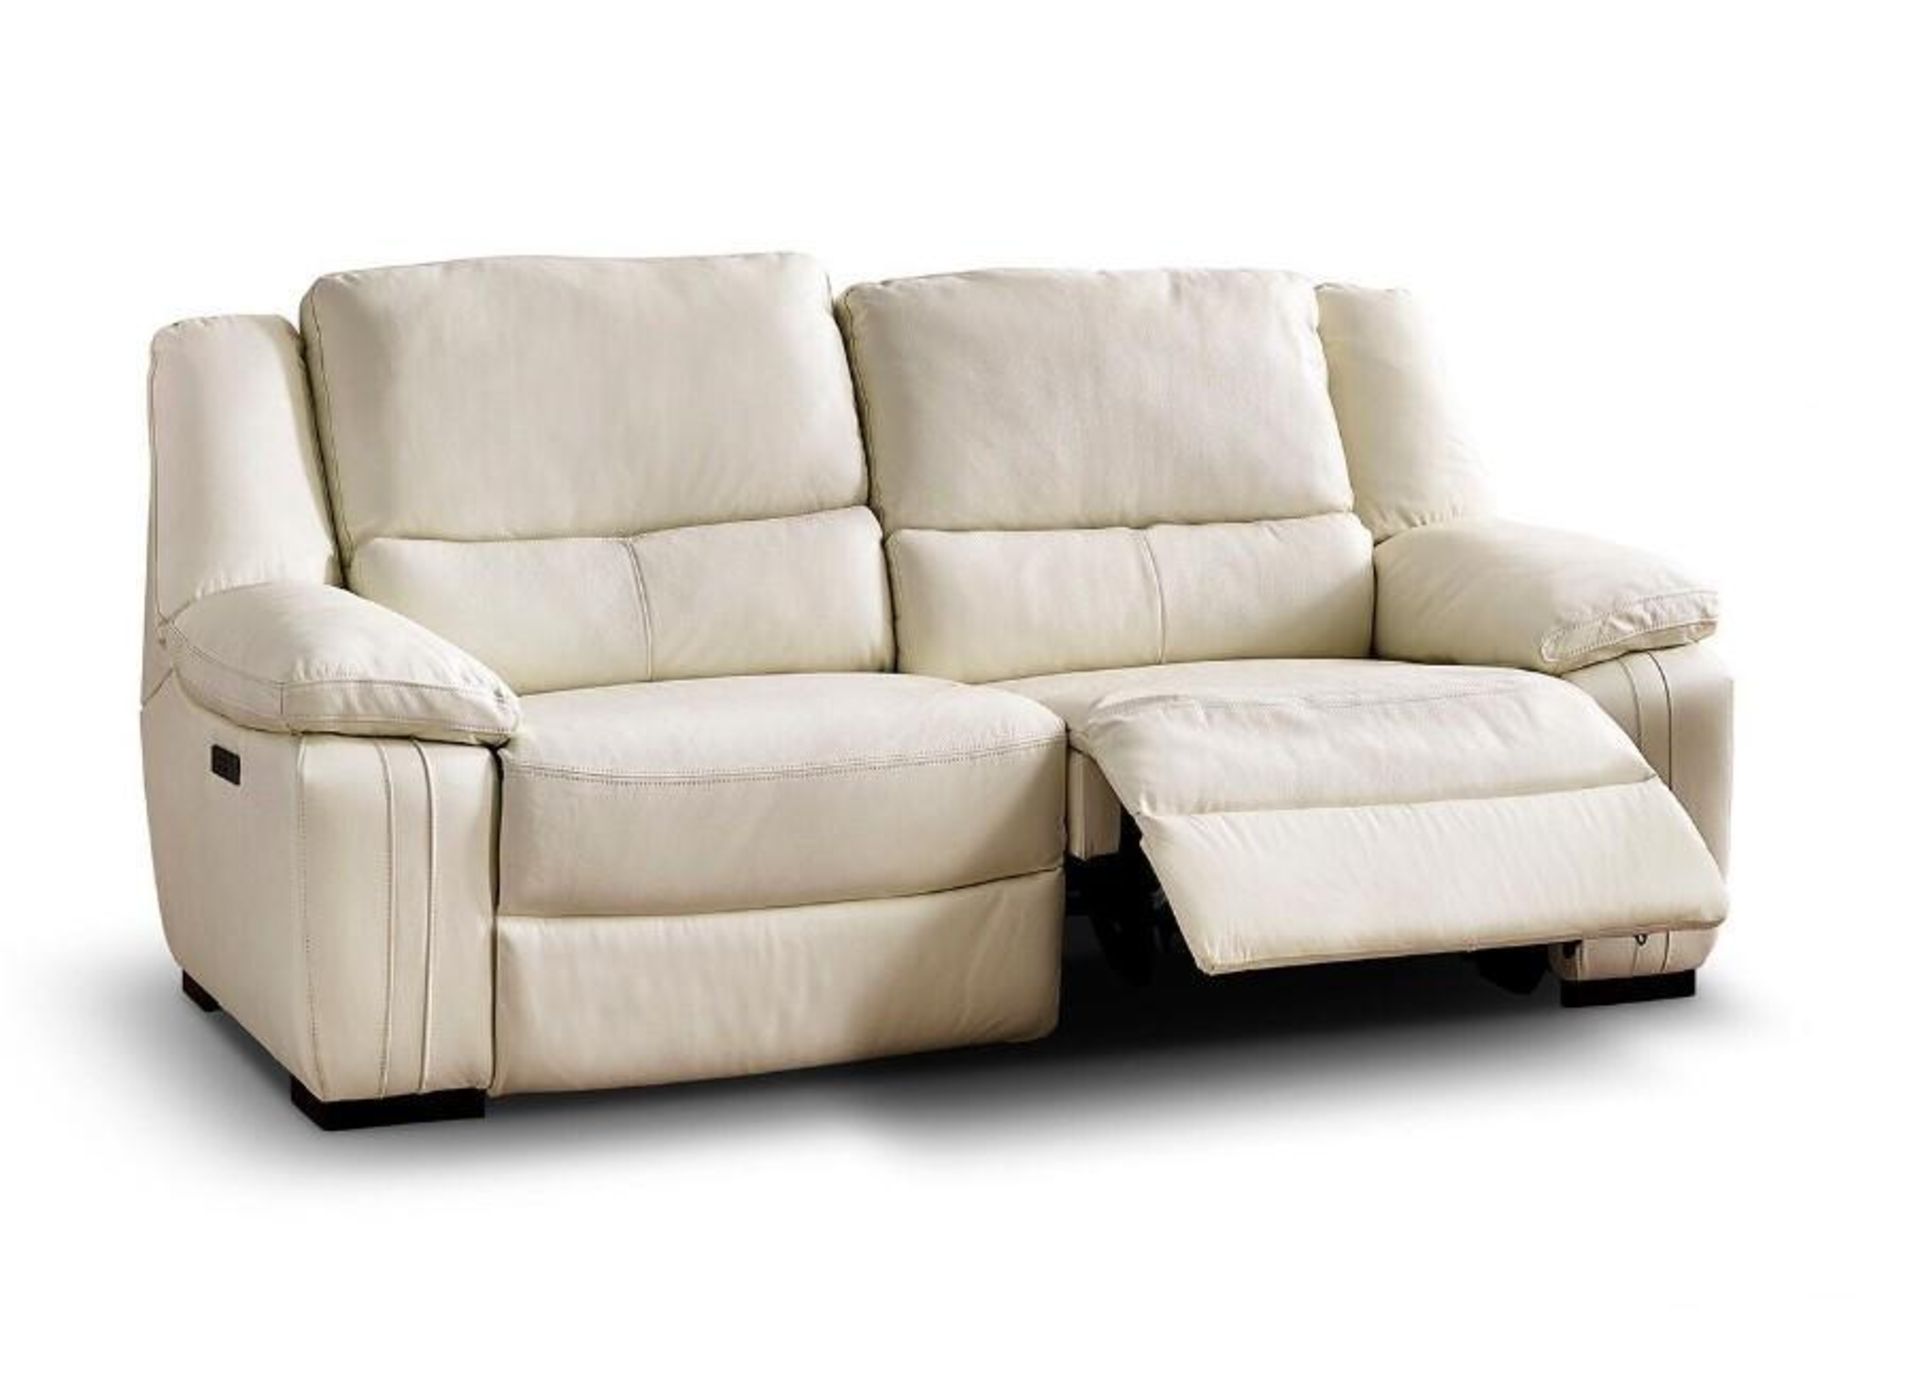 Brand new and boxed SCS Fallon 3 + 2 seater electric reclining sofa in Cream. - Bild 6 aus 7